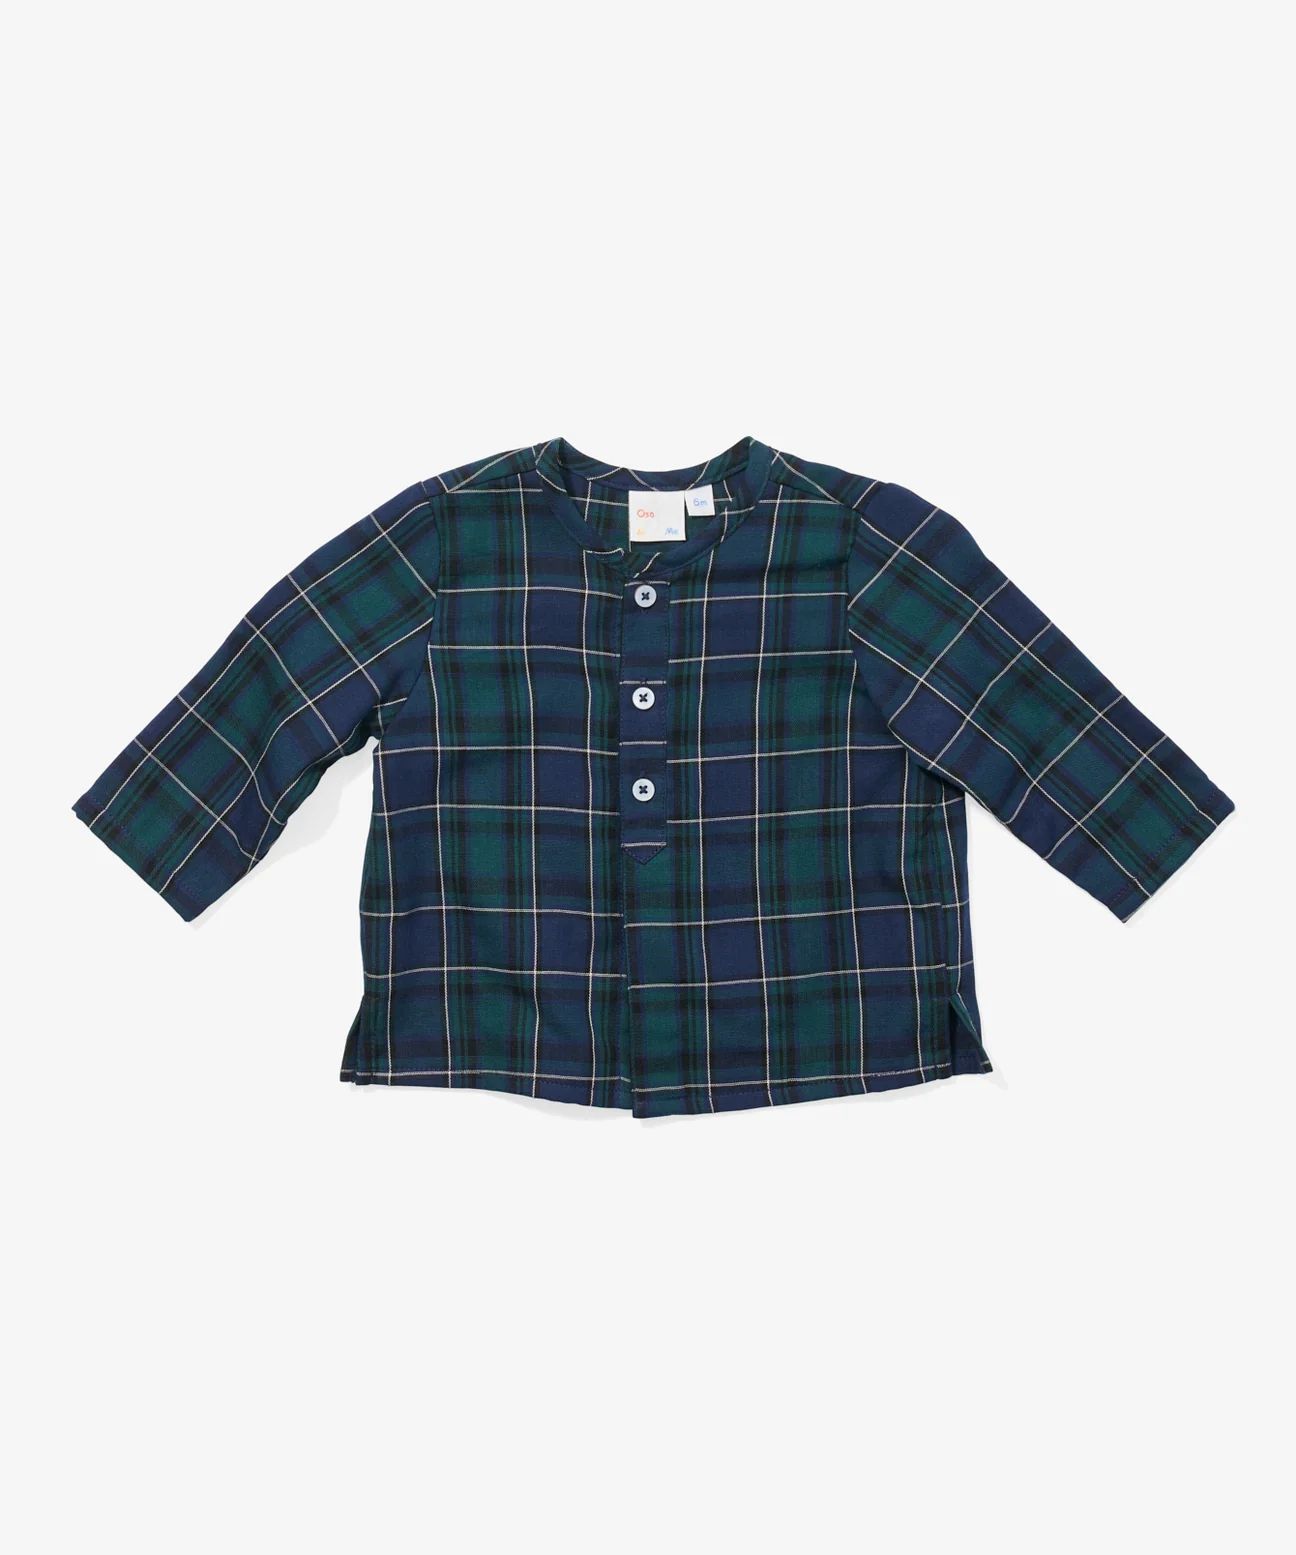 Lupo Baby Shirt, Green Plaid | Oso and Me | Oso & Me